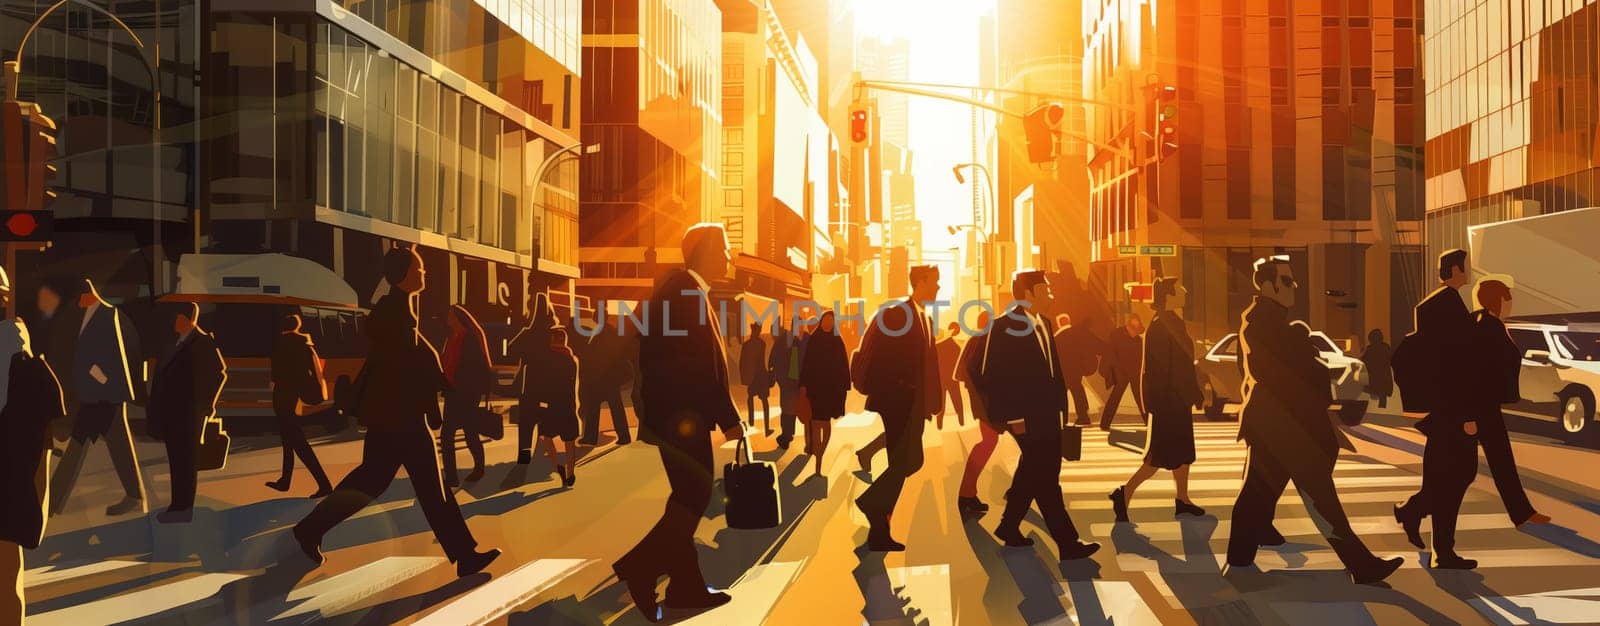 A crowd of people at a public event walking across city street at sunset by richwolf